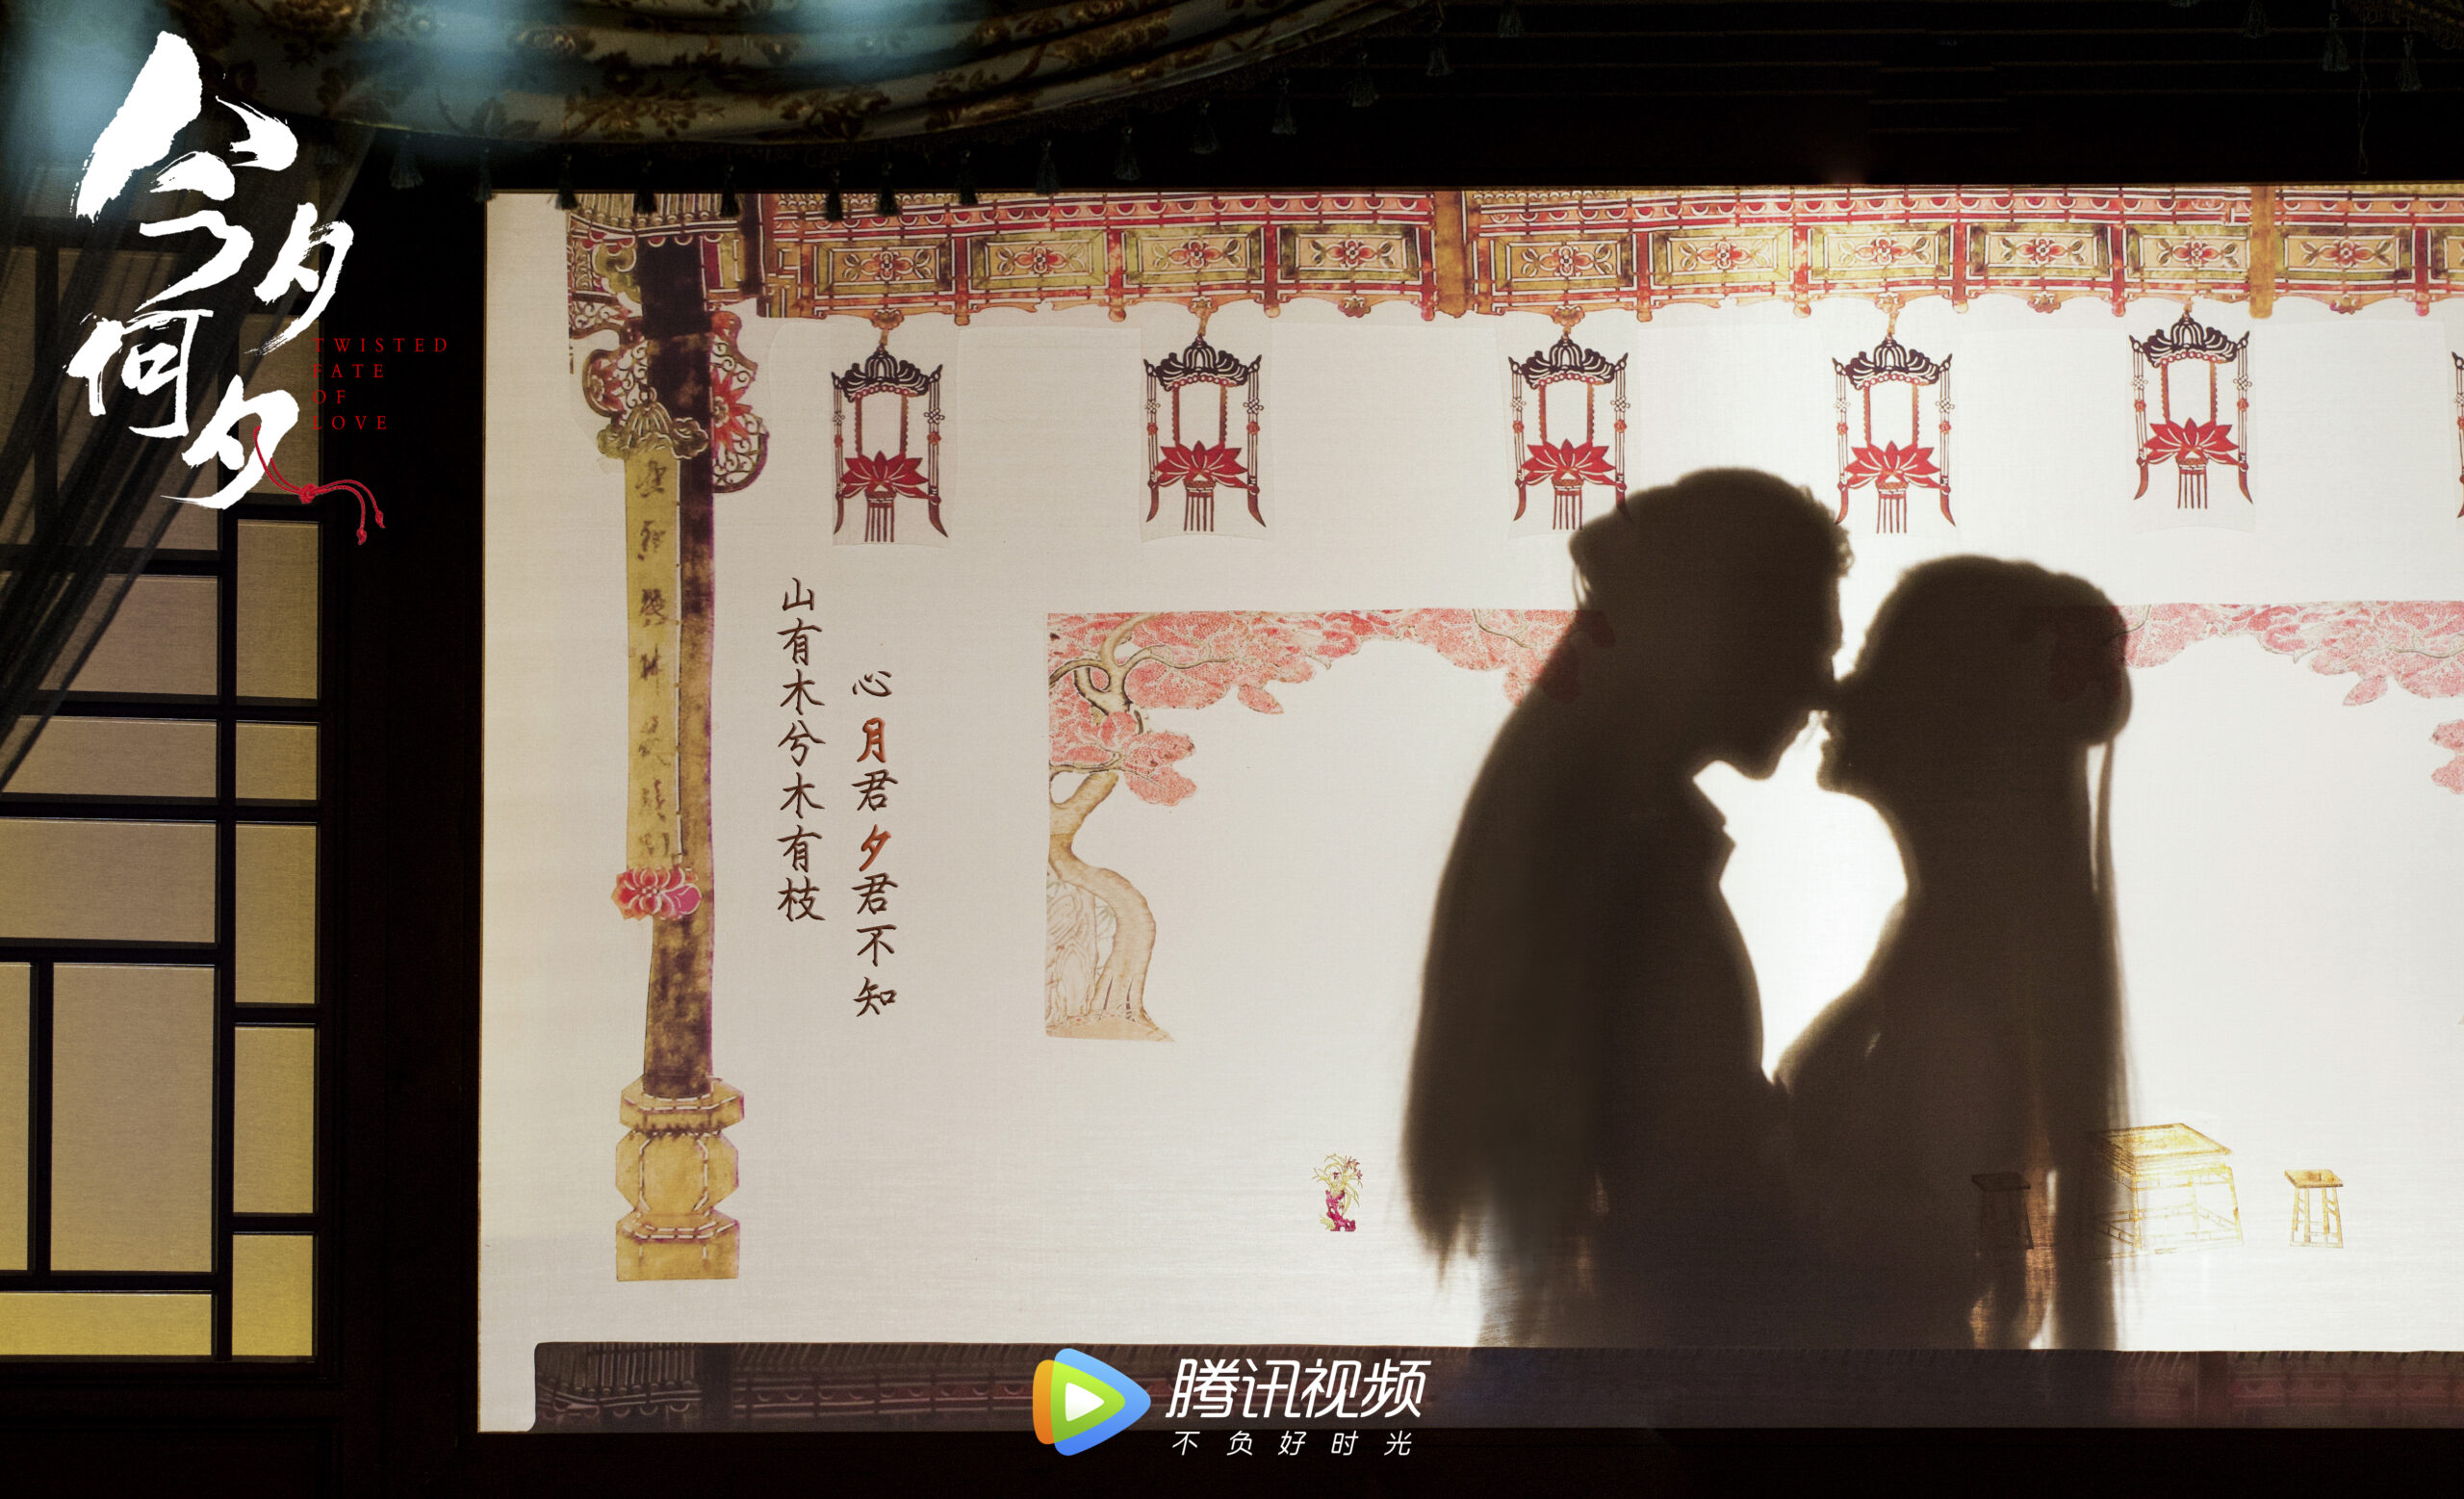 The Chinese costume drama Twisted Fate of Love, which is popular overseas, has failed to achieve good results in China’s local market